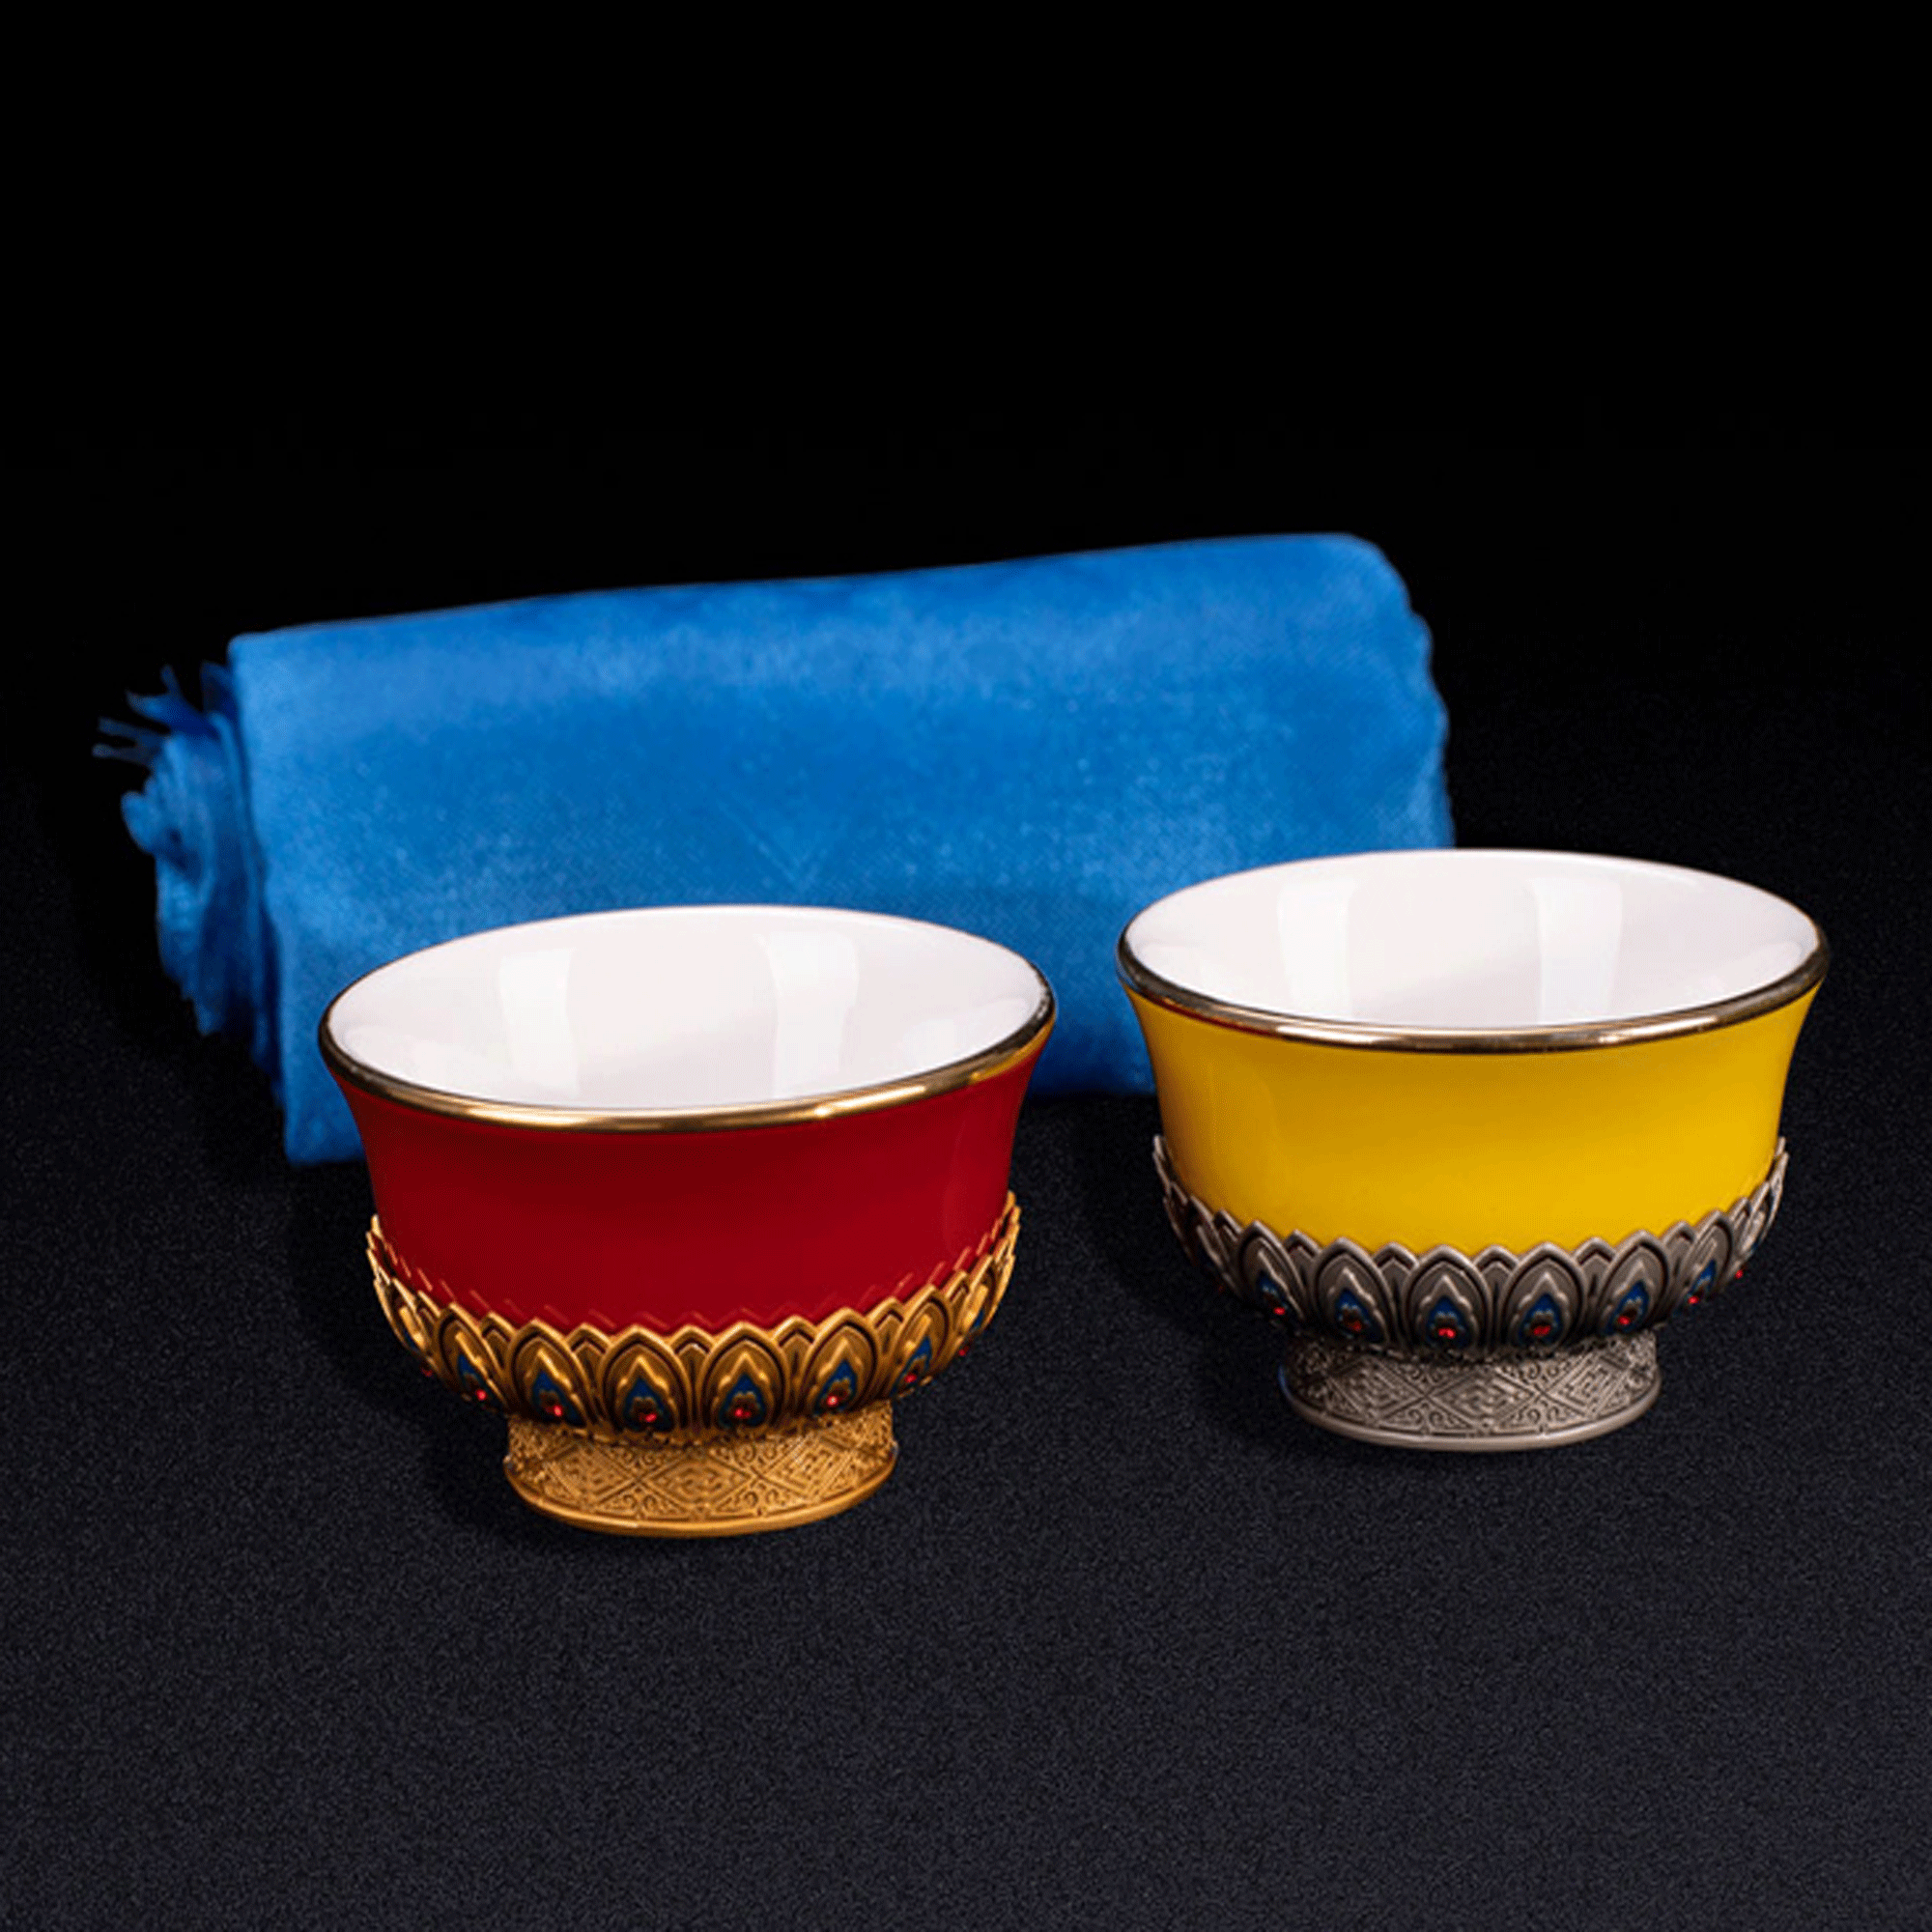 Rong Chao creative Deji wine cup White wine cup set Cultural and creative gifts Mongolian culture gift Hada National craft gift decoration